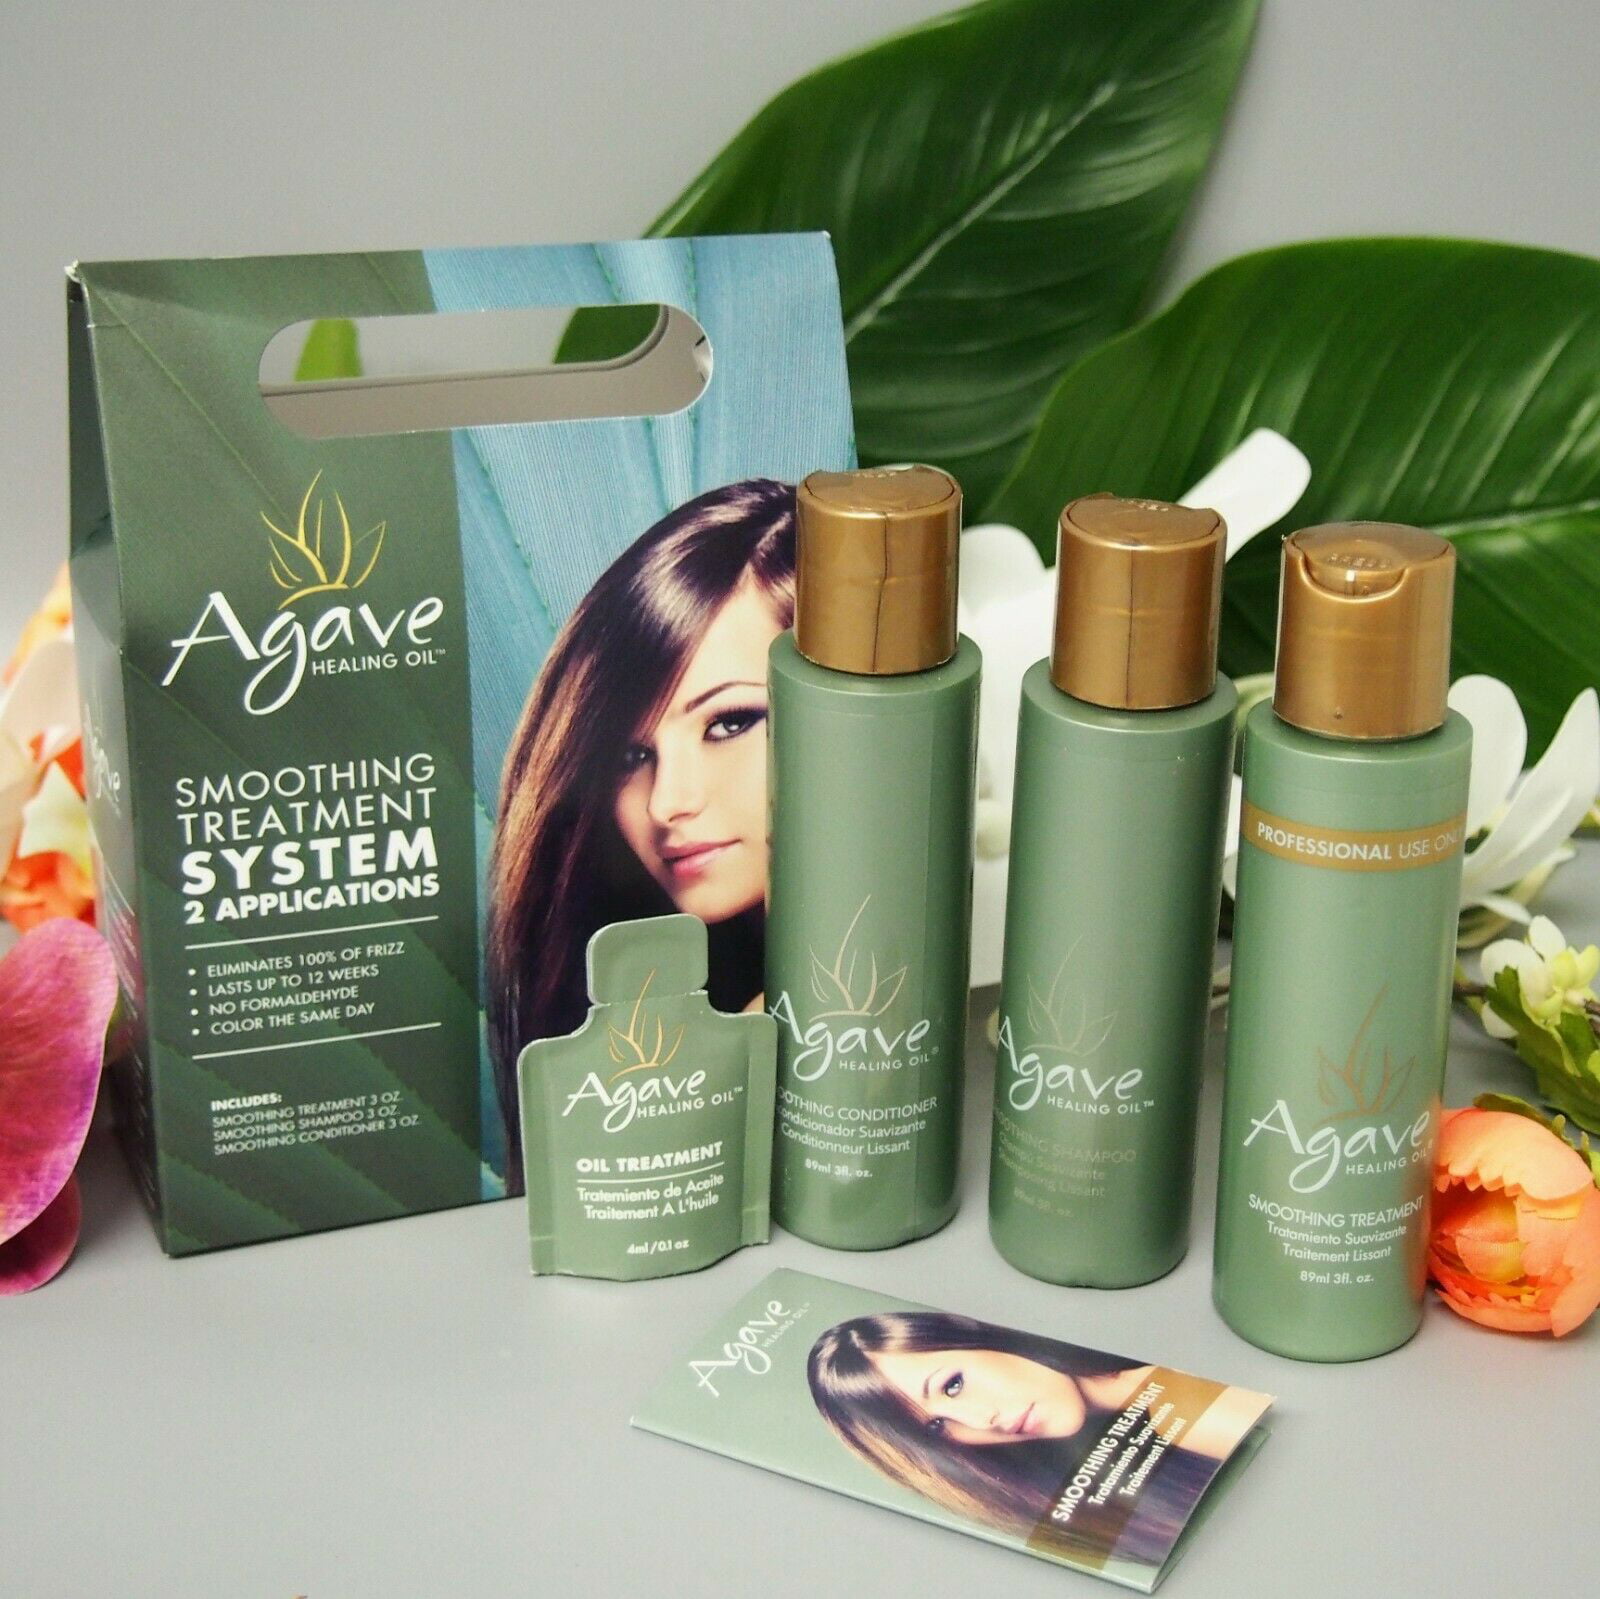 Agave Smoothing Treatment 2 Application Kit 